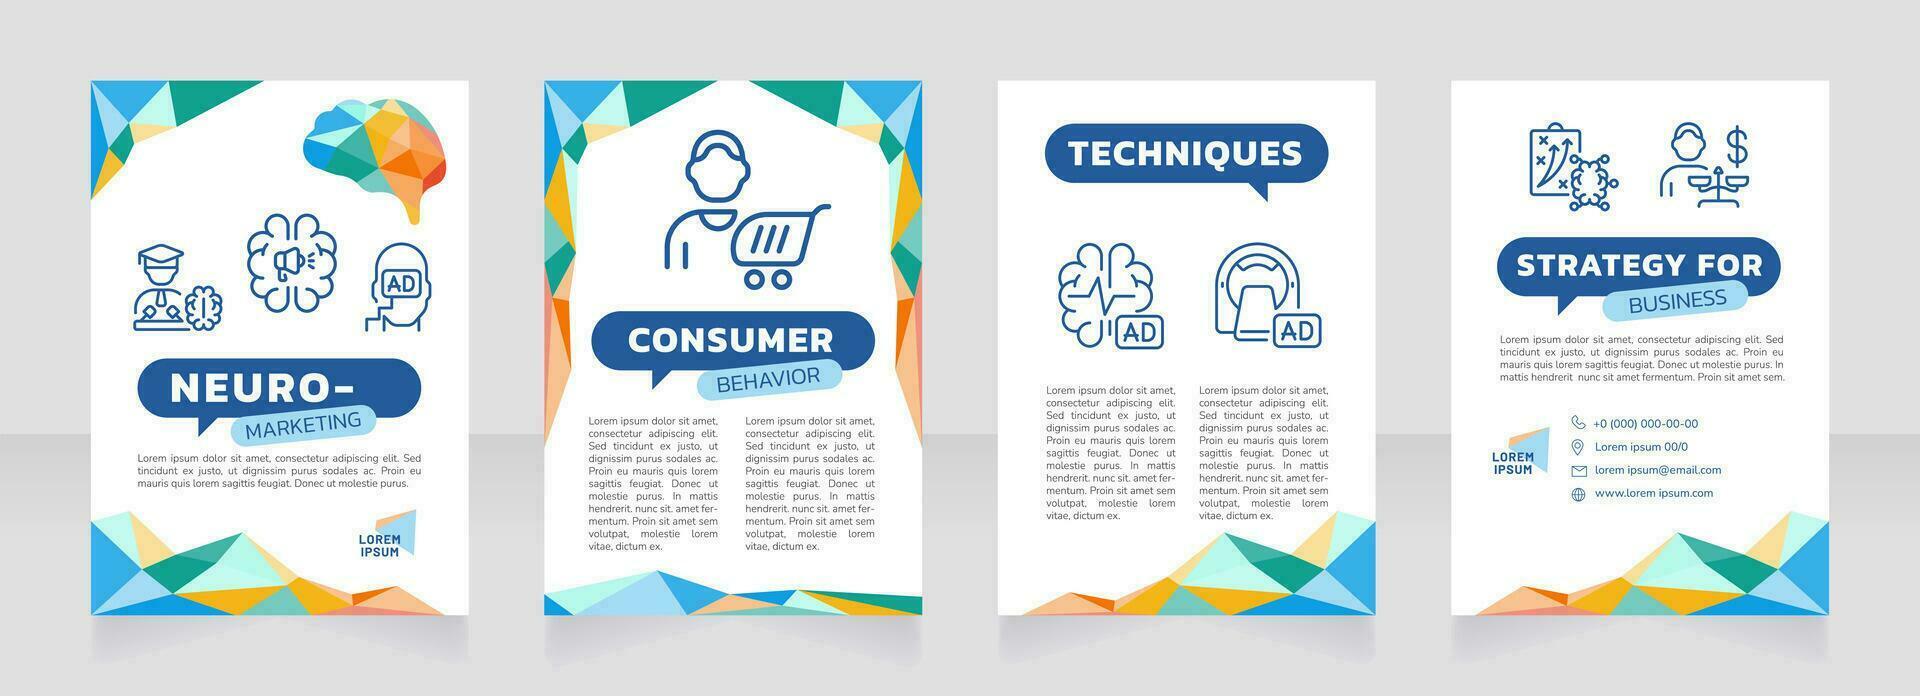 Neuromarketing multicolor premade brochure template. Consumer behavior. Marketing strategy. Neuroscience booklet design with icons, copy space. Editable 4 layouts vector